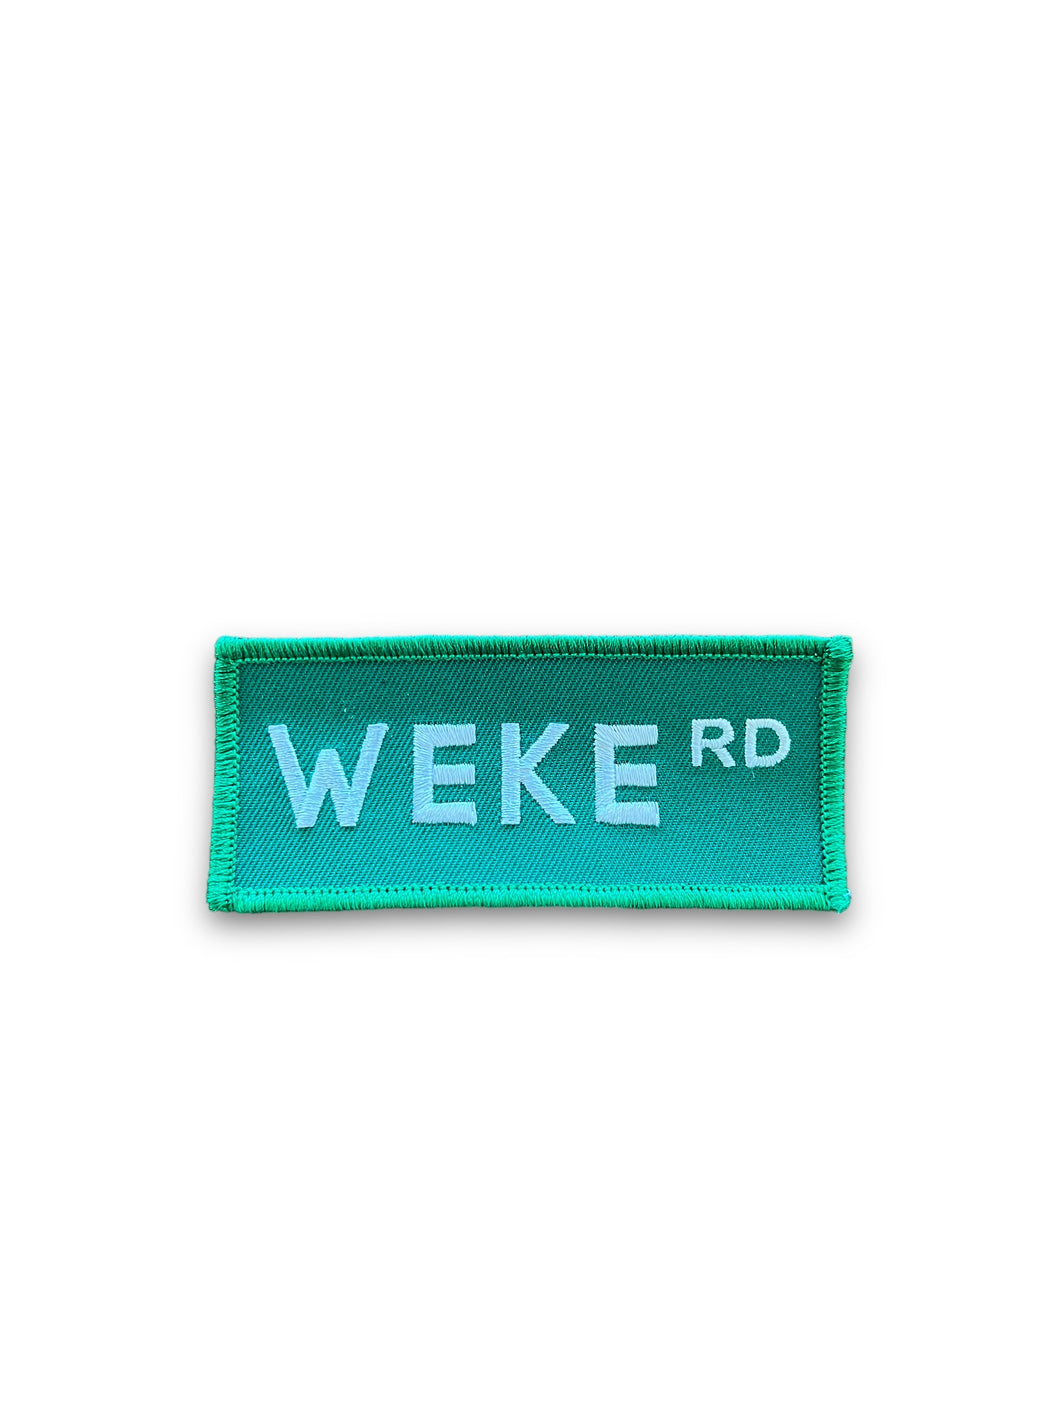 Weke Rd Patch